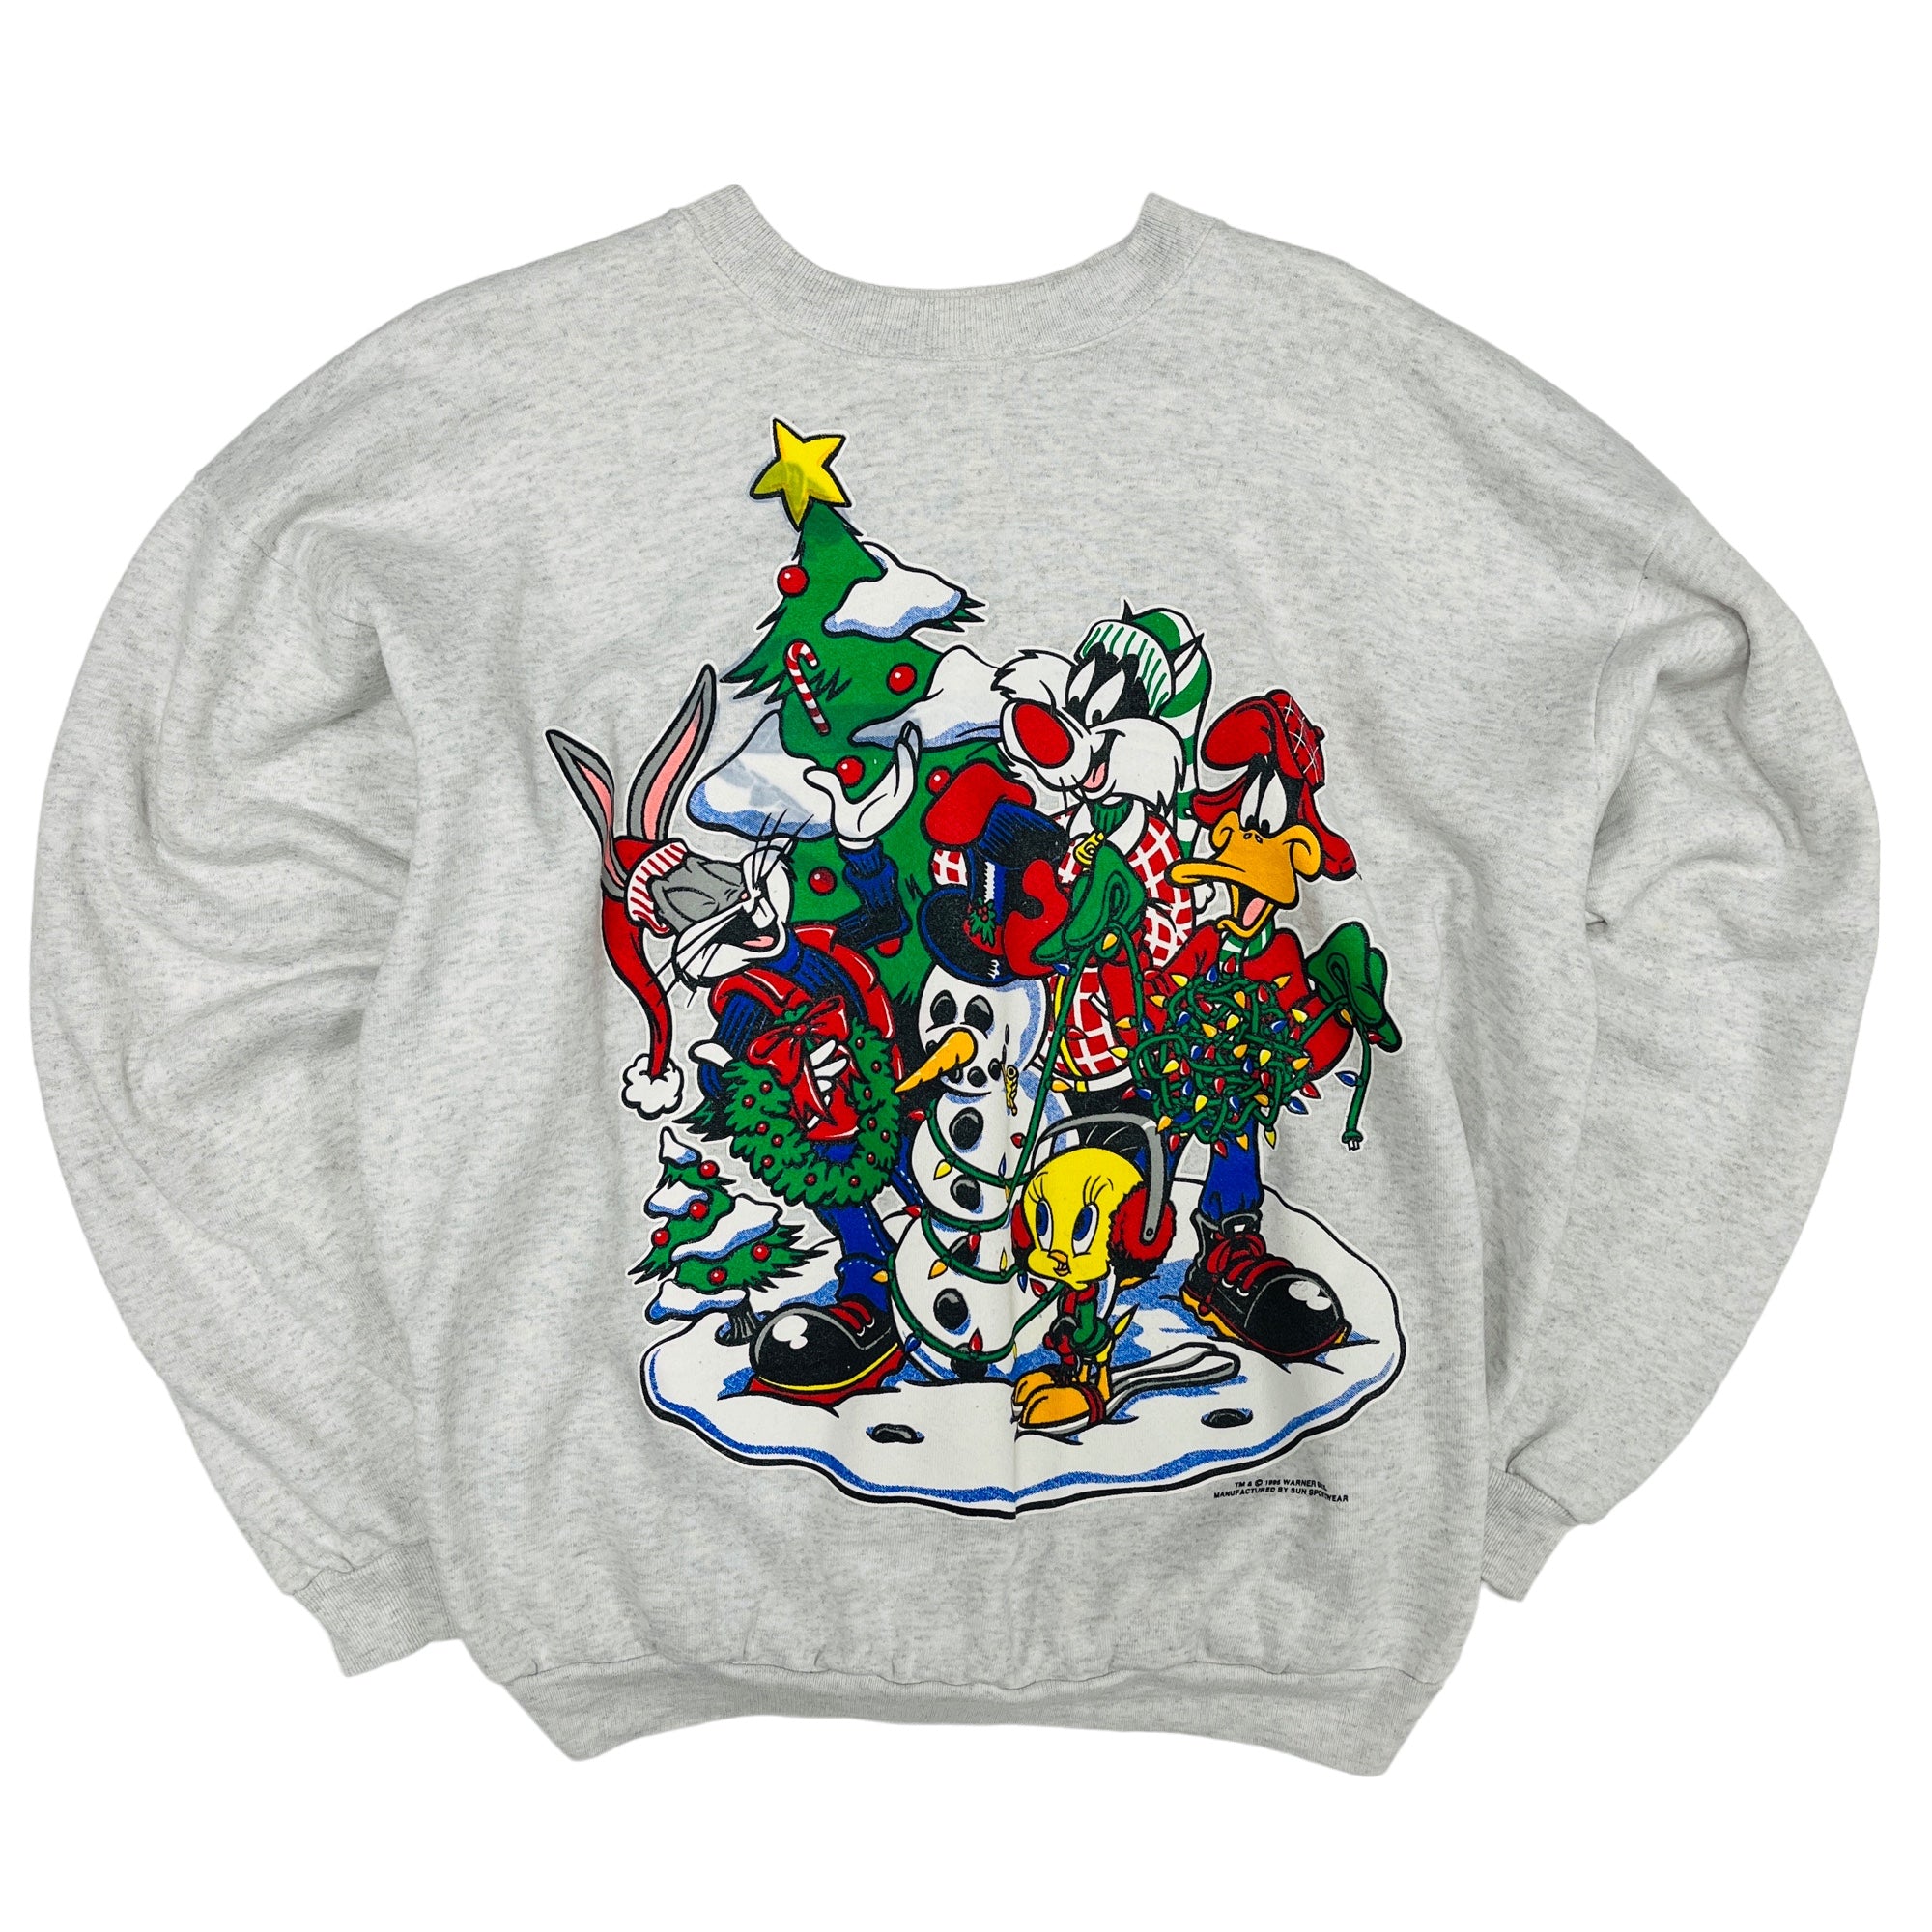 90's Looney Tunes Christmas Graphic Sweater - XL